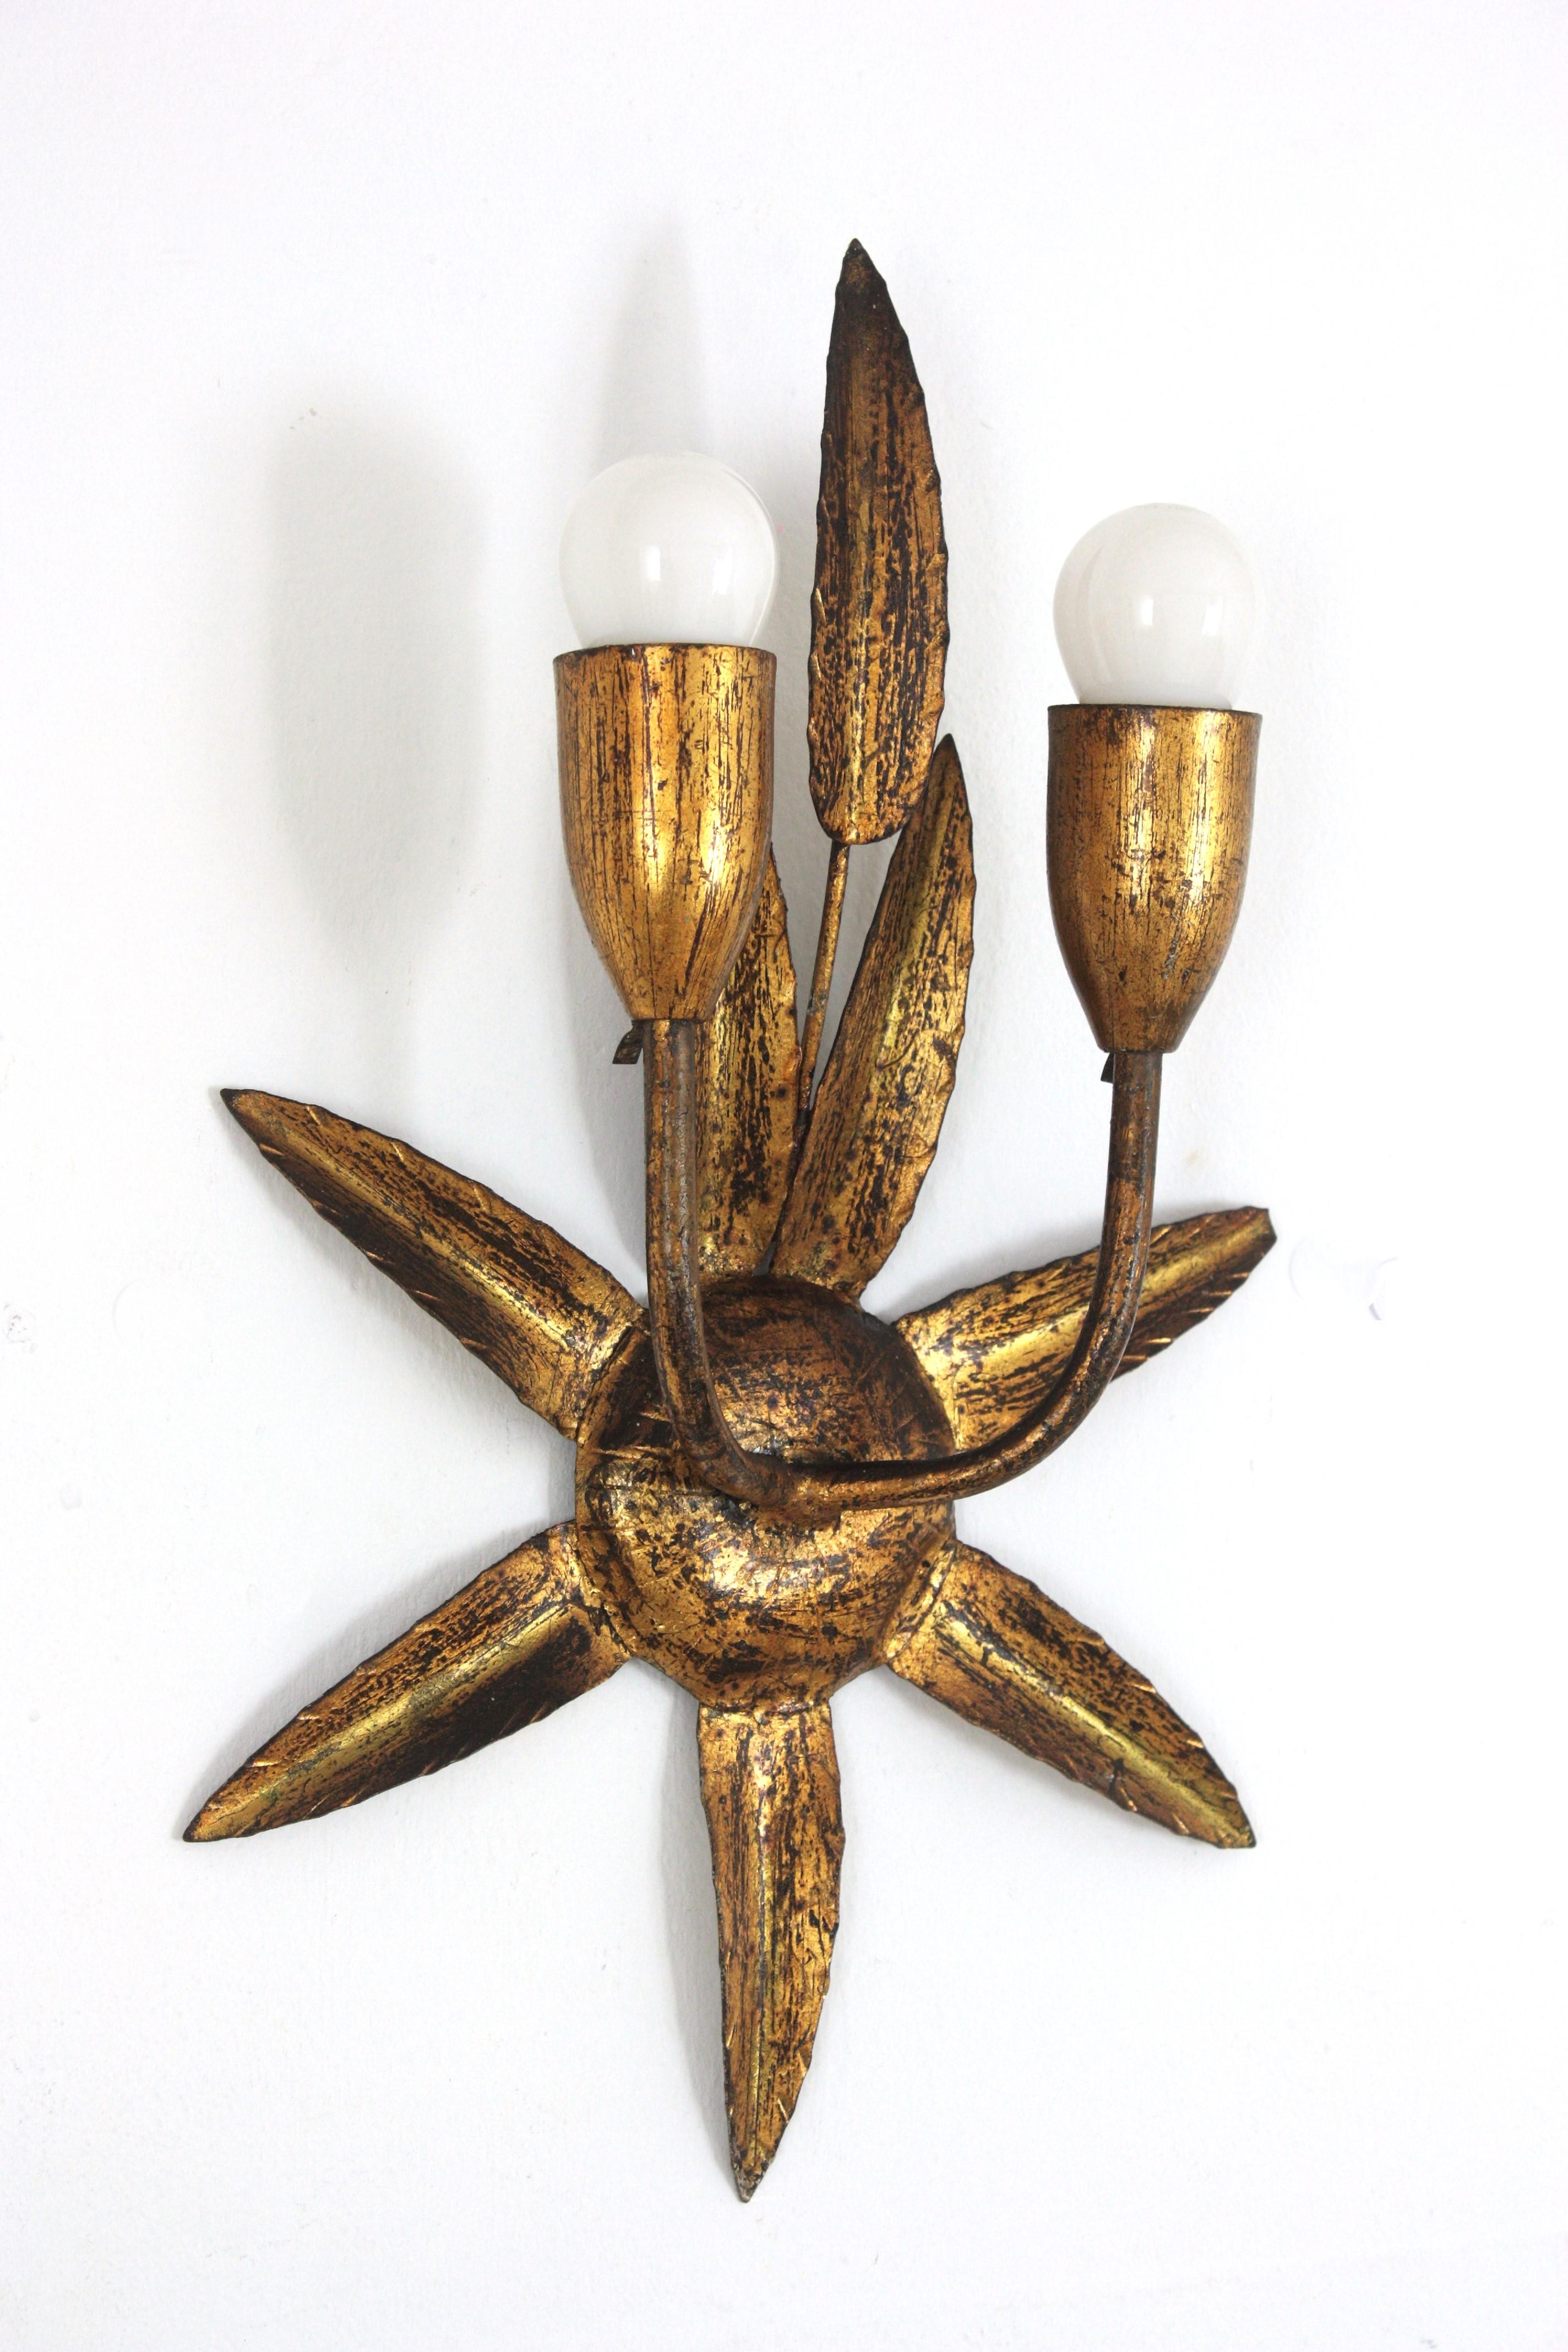 20th Century Spanish Gilt Iron Wall Sconce with Foliage Design and Starburst Backplate, 1950s For Sale